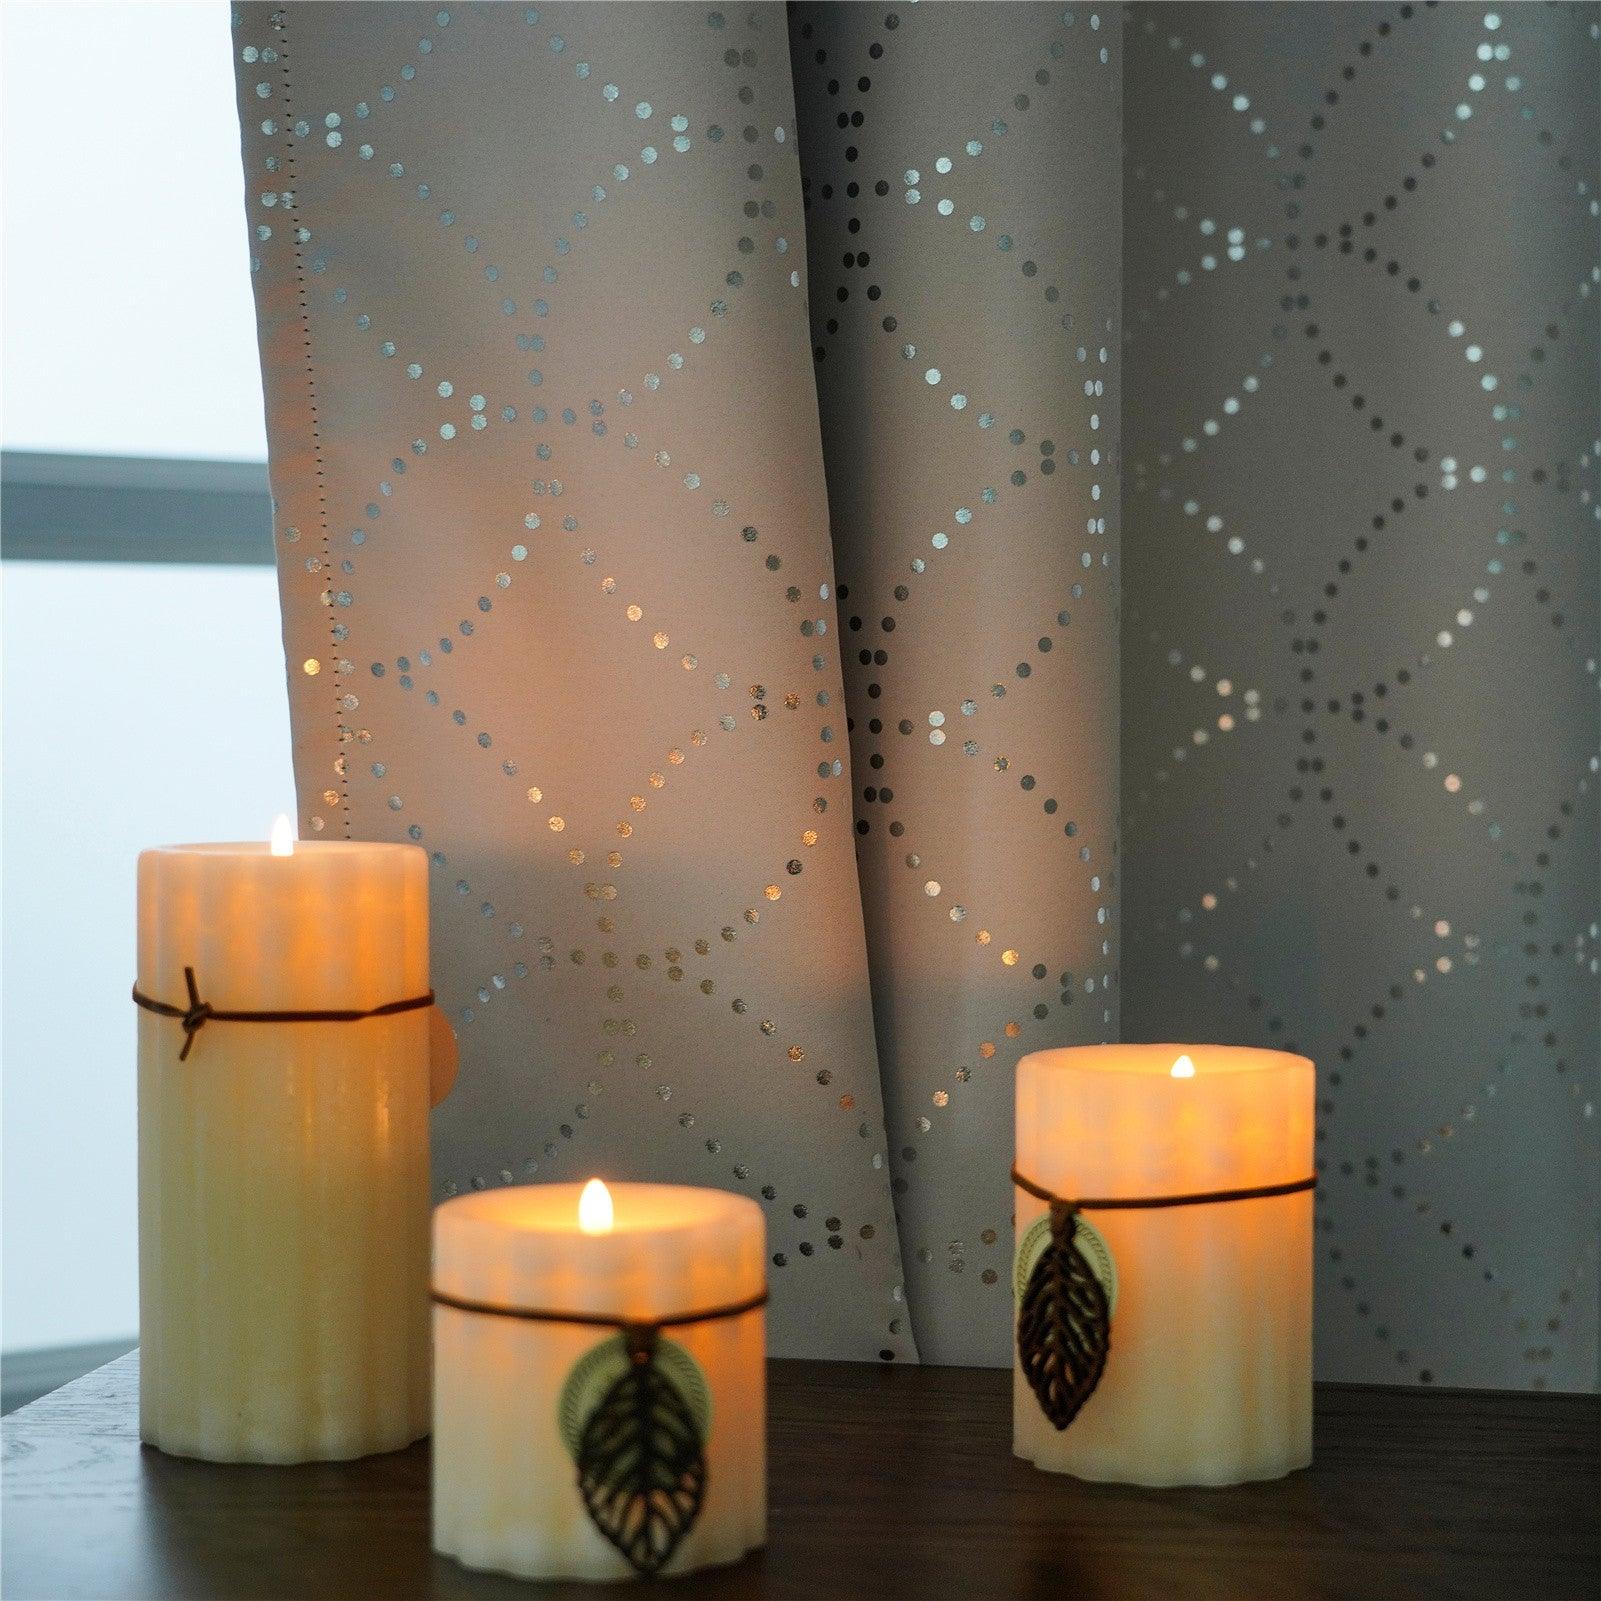 Custom Curtain-Thermal Blackout Drapes-Pongee Made Silver Foil Dots Printed  For Bedroom,1 Panel - Topfinel